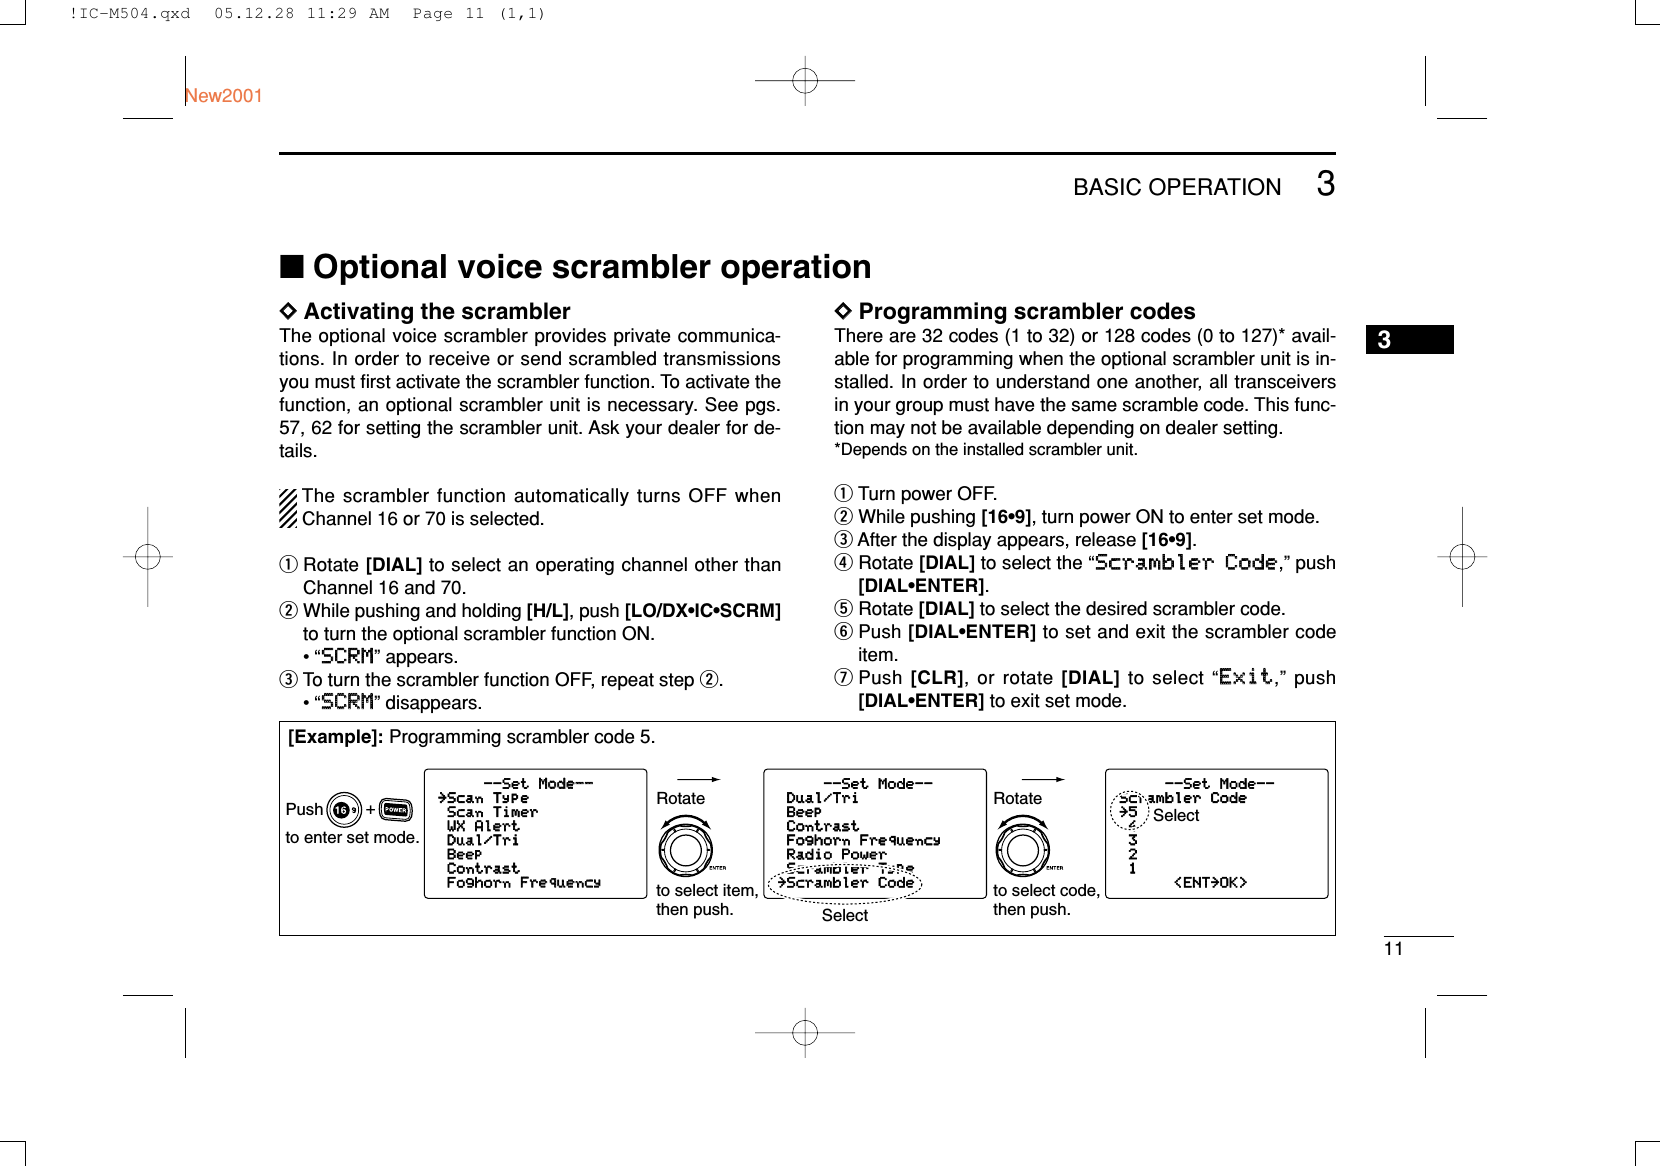 113BASIC OPERATIONNew20013■Optional voice scrambler operationDDActivating the scramblerThe optional voice scrambler provides private communica-tions. In order to receive or send scrambled transmissionsyou must ﬁrst activate the scrambler function. To activate thefunction, an optional scrambler unit is necessary. See pgs.57, 62 for setting the scrambler unit. Ask your dealer for de-tails.The scrambler function automatically turns OFF whenChannel 16 or 70 is selected.qRotate [DIAL] to select an operating channel other thanChannel 16 and 70.wWhile pushing and holding [H/L], push [LO/DX•IC•SCRM]to turn the optional scrambler function ON.•“SSCCRRMM” appears.eTo turn the scrambler function OFF, repeat step w.•“SSCCRRMM” disappears.DDProgramming scrambler codesThere are 32 codes (1 to 32) or 128 codes (0 to 127)* avail-able for programming when the optional scrambler unit is in-stalled. In order to understand one another, all transceiversin your group must have the same scramble code. This func-tion may not be available depending on dealer setting.*Depends on the installed scrambler unit.qTurn power OFF.wWhile pushing [16•9], turn power ON to enter set mode.eAfter the display appears, release [16•9].rRotate [DIAL] to select the “SSccrraammbblleerr CCooddee,” push[DIAL•ENTER].tRotate [DIAL] to select the desired scrambler code.yPush [DIAL•ENTER] to set and exit the scrambler codeitem.uPush [CLR], or rotate [DIAL] to select “EExxiitt,” push[DIAL•ENTER] to exit set mode.--Set Mode--Scrambler Code˘54321&lt;ENT˘OK&gt;--Set Mode--Dual/TriBeepContrastFoghorn FrequencyRadio PowerScrambler Type˘Scrambler Code--Set Mode--Mode--˘Scan TypeScan TimerWX AlertAlertDual/TriBeepContrastFoghorn FrequencyFrequency+to enter set mode.Pushto select code,then push.Rotateto select item,then push.RotateSelectSelect[Example]: Programming scrambler code 5.!IC-M504.qxd  05.12.28 11:29 AM  Page 11 (1,1)